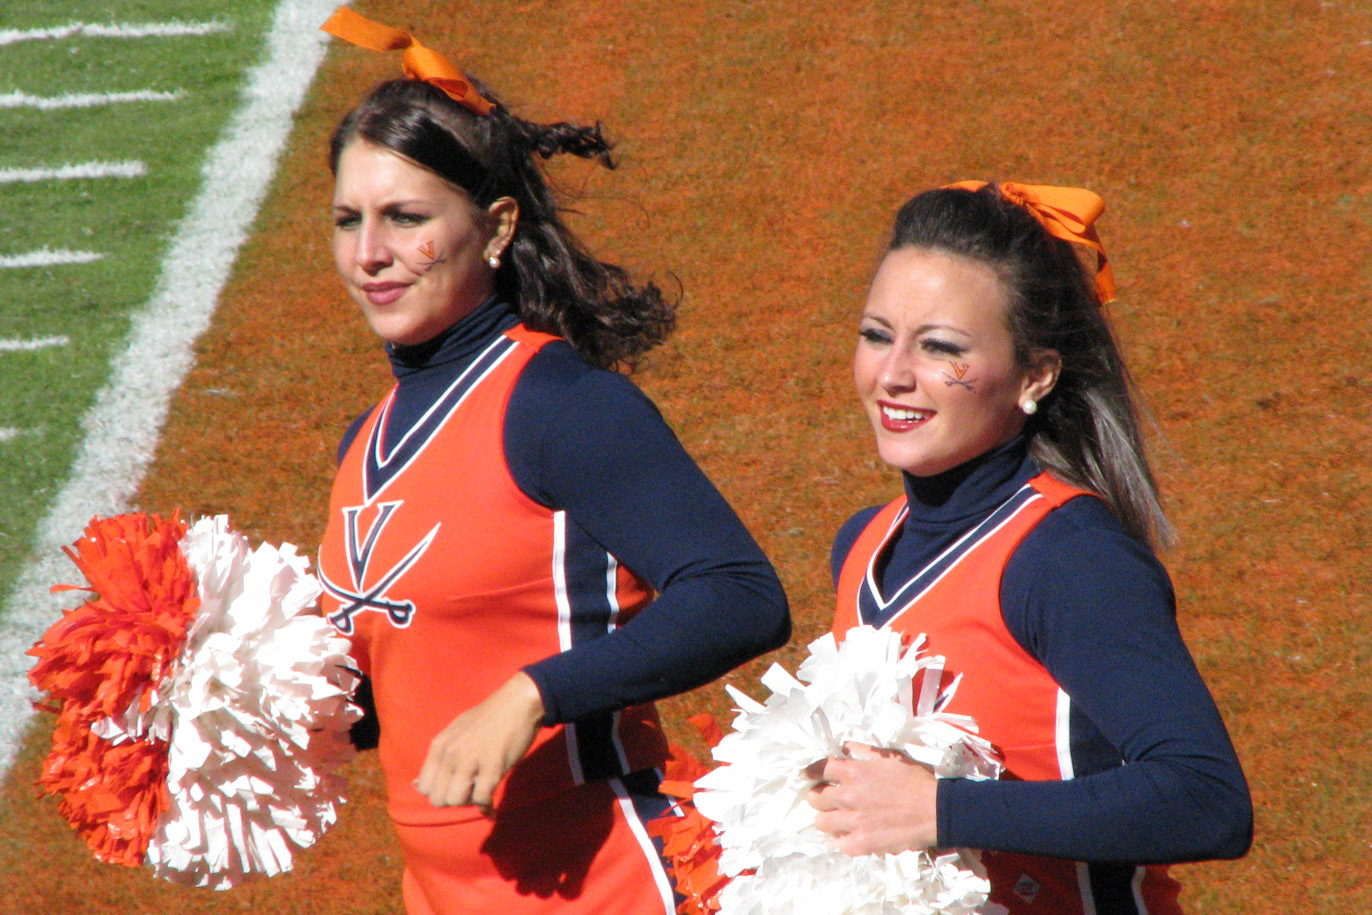 the cheerleaders are all wearing orange and blue